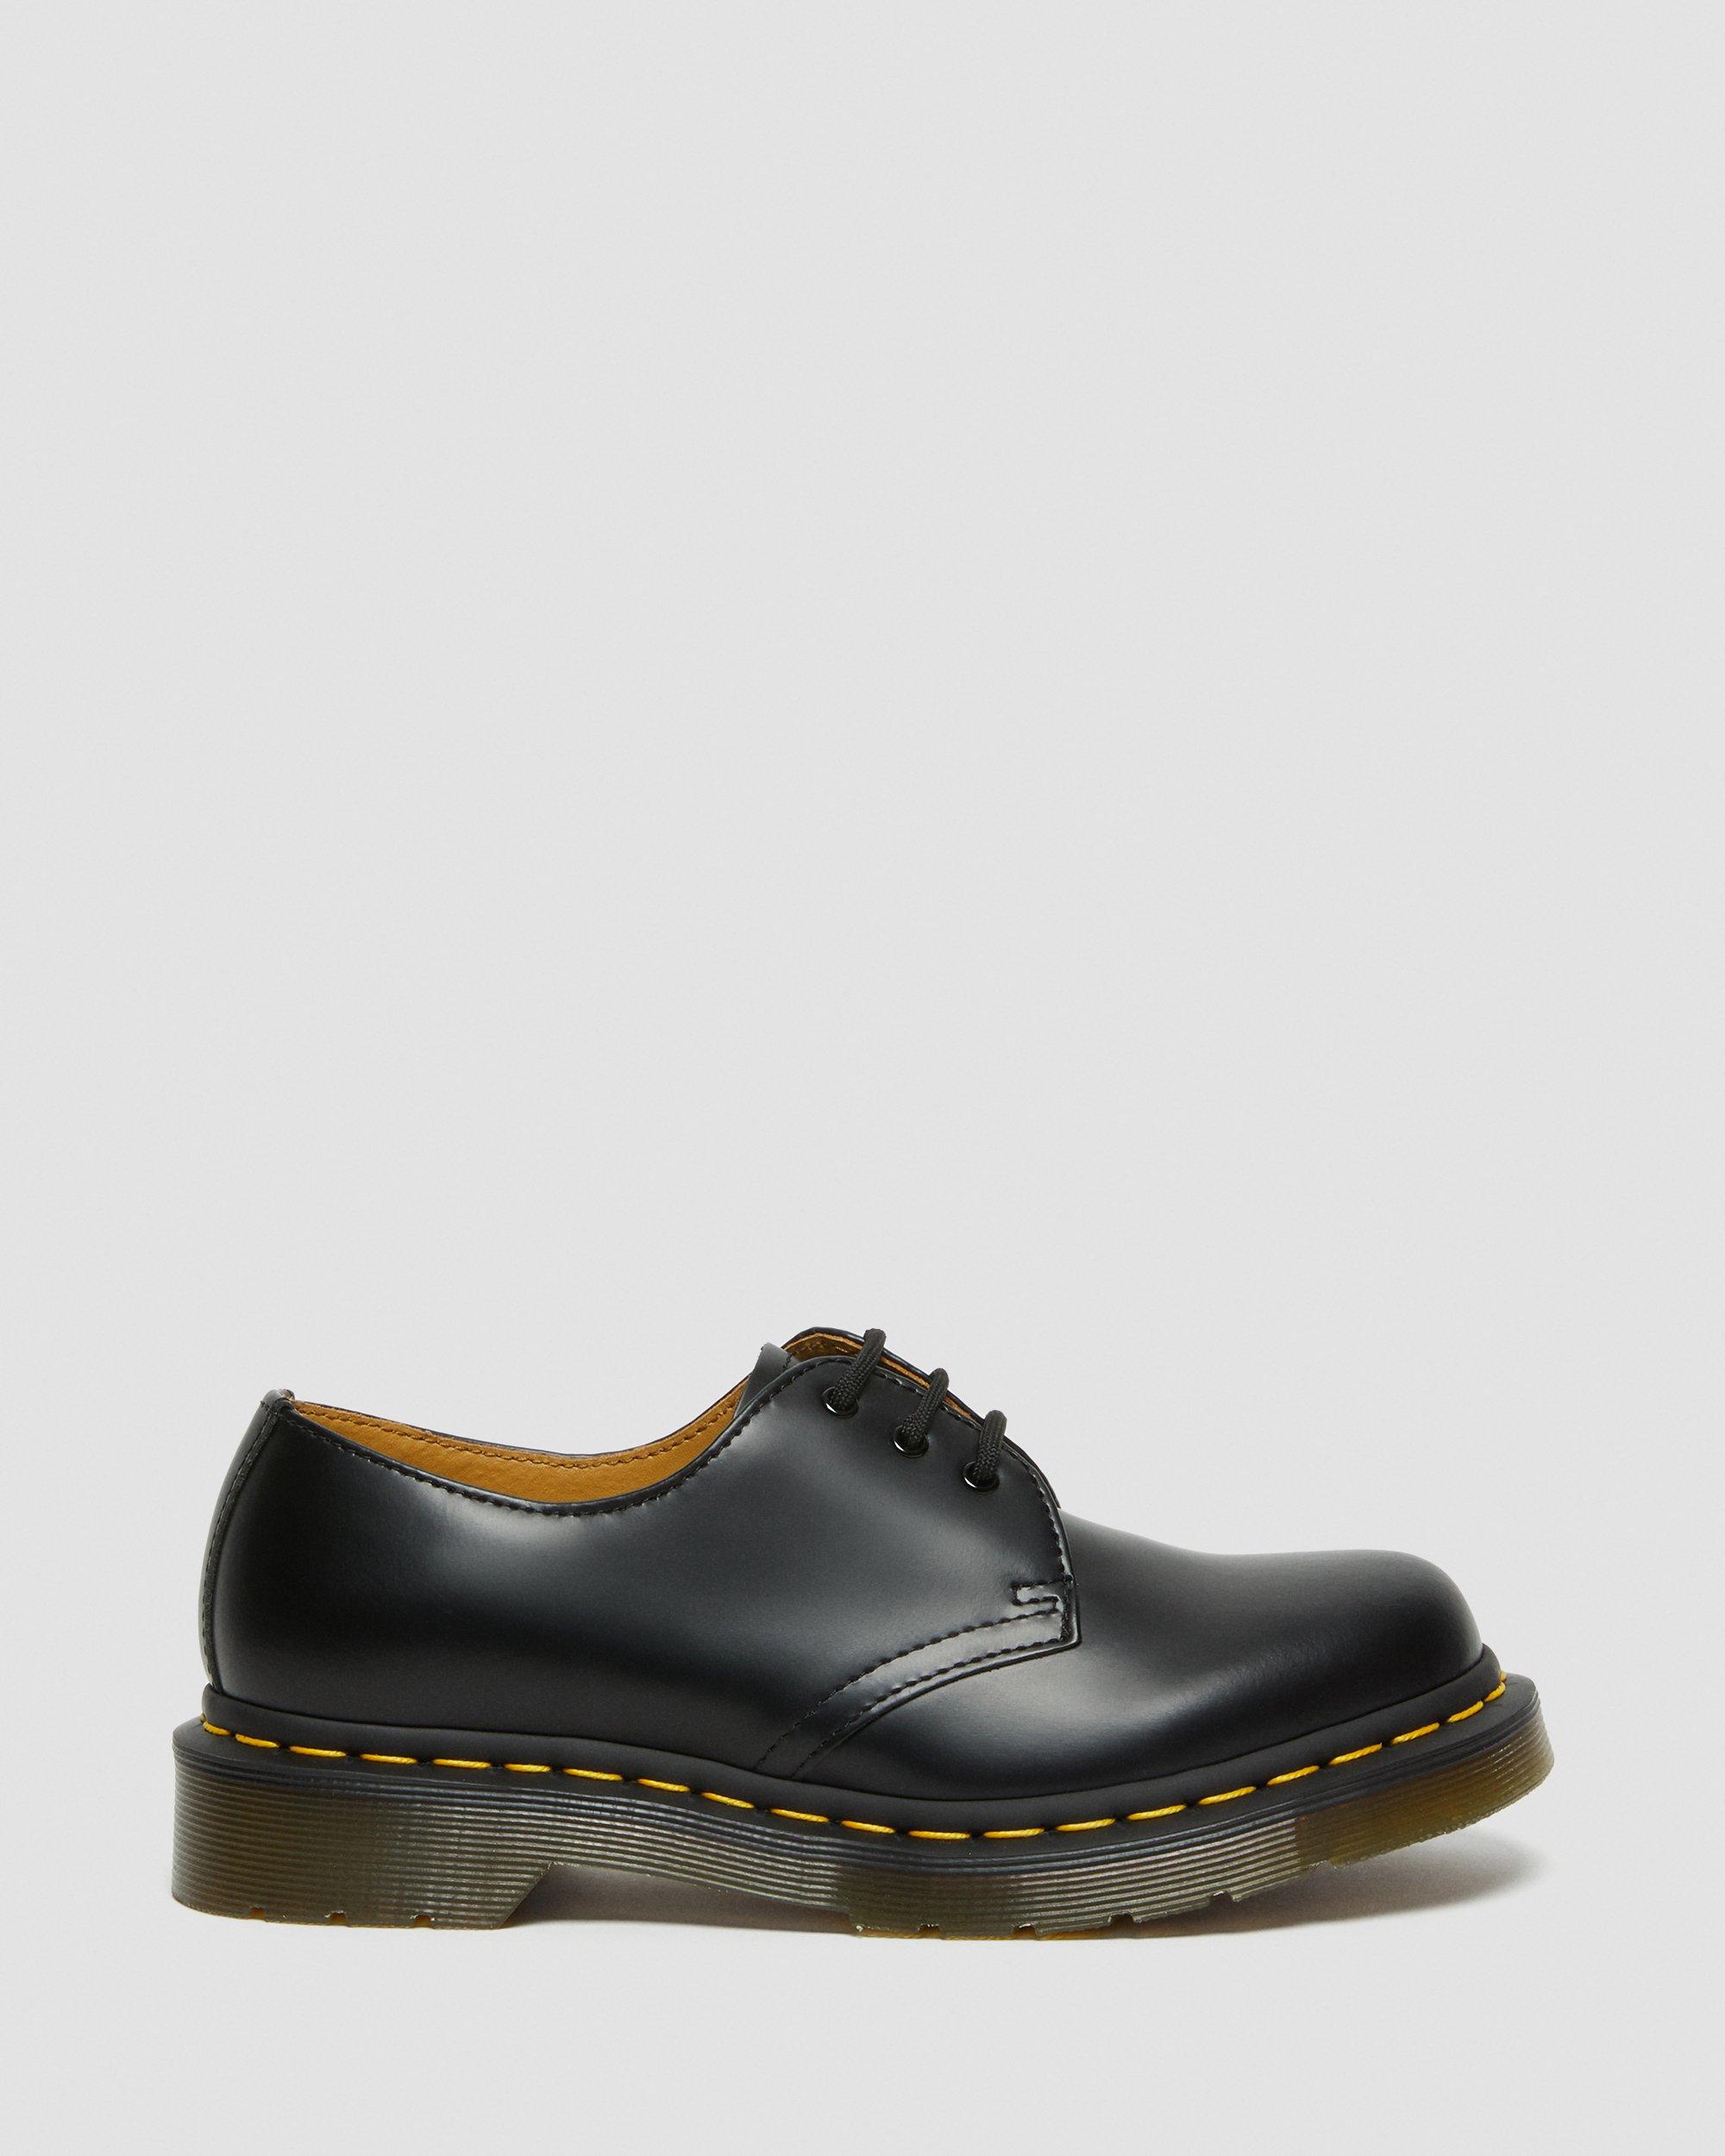 1461 Women's Smooth Leather Oxford Shoes in Black